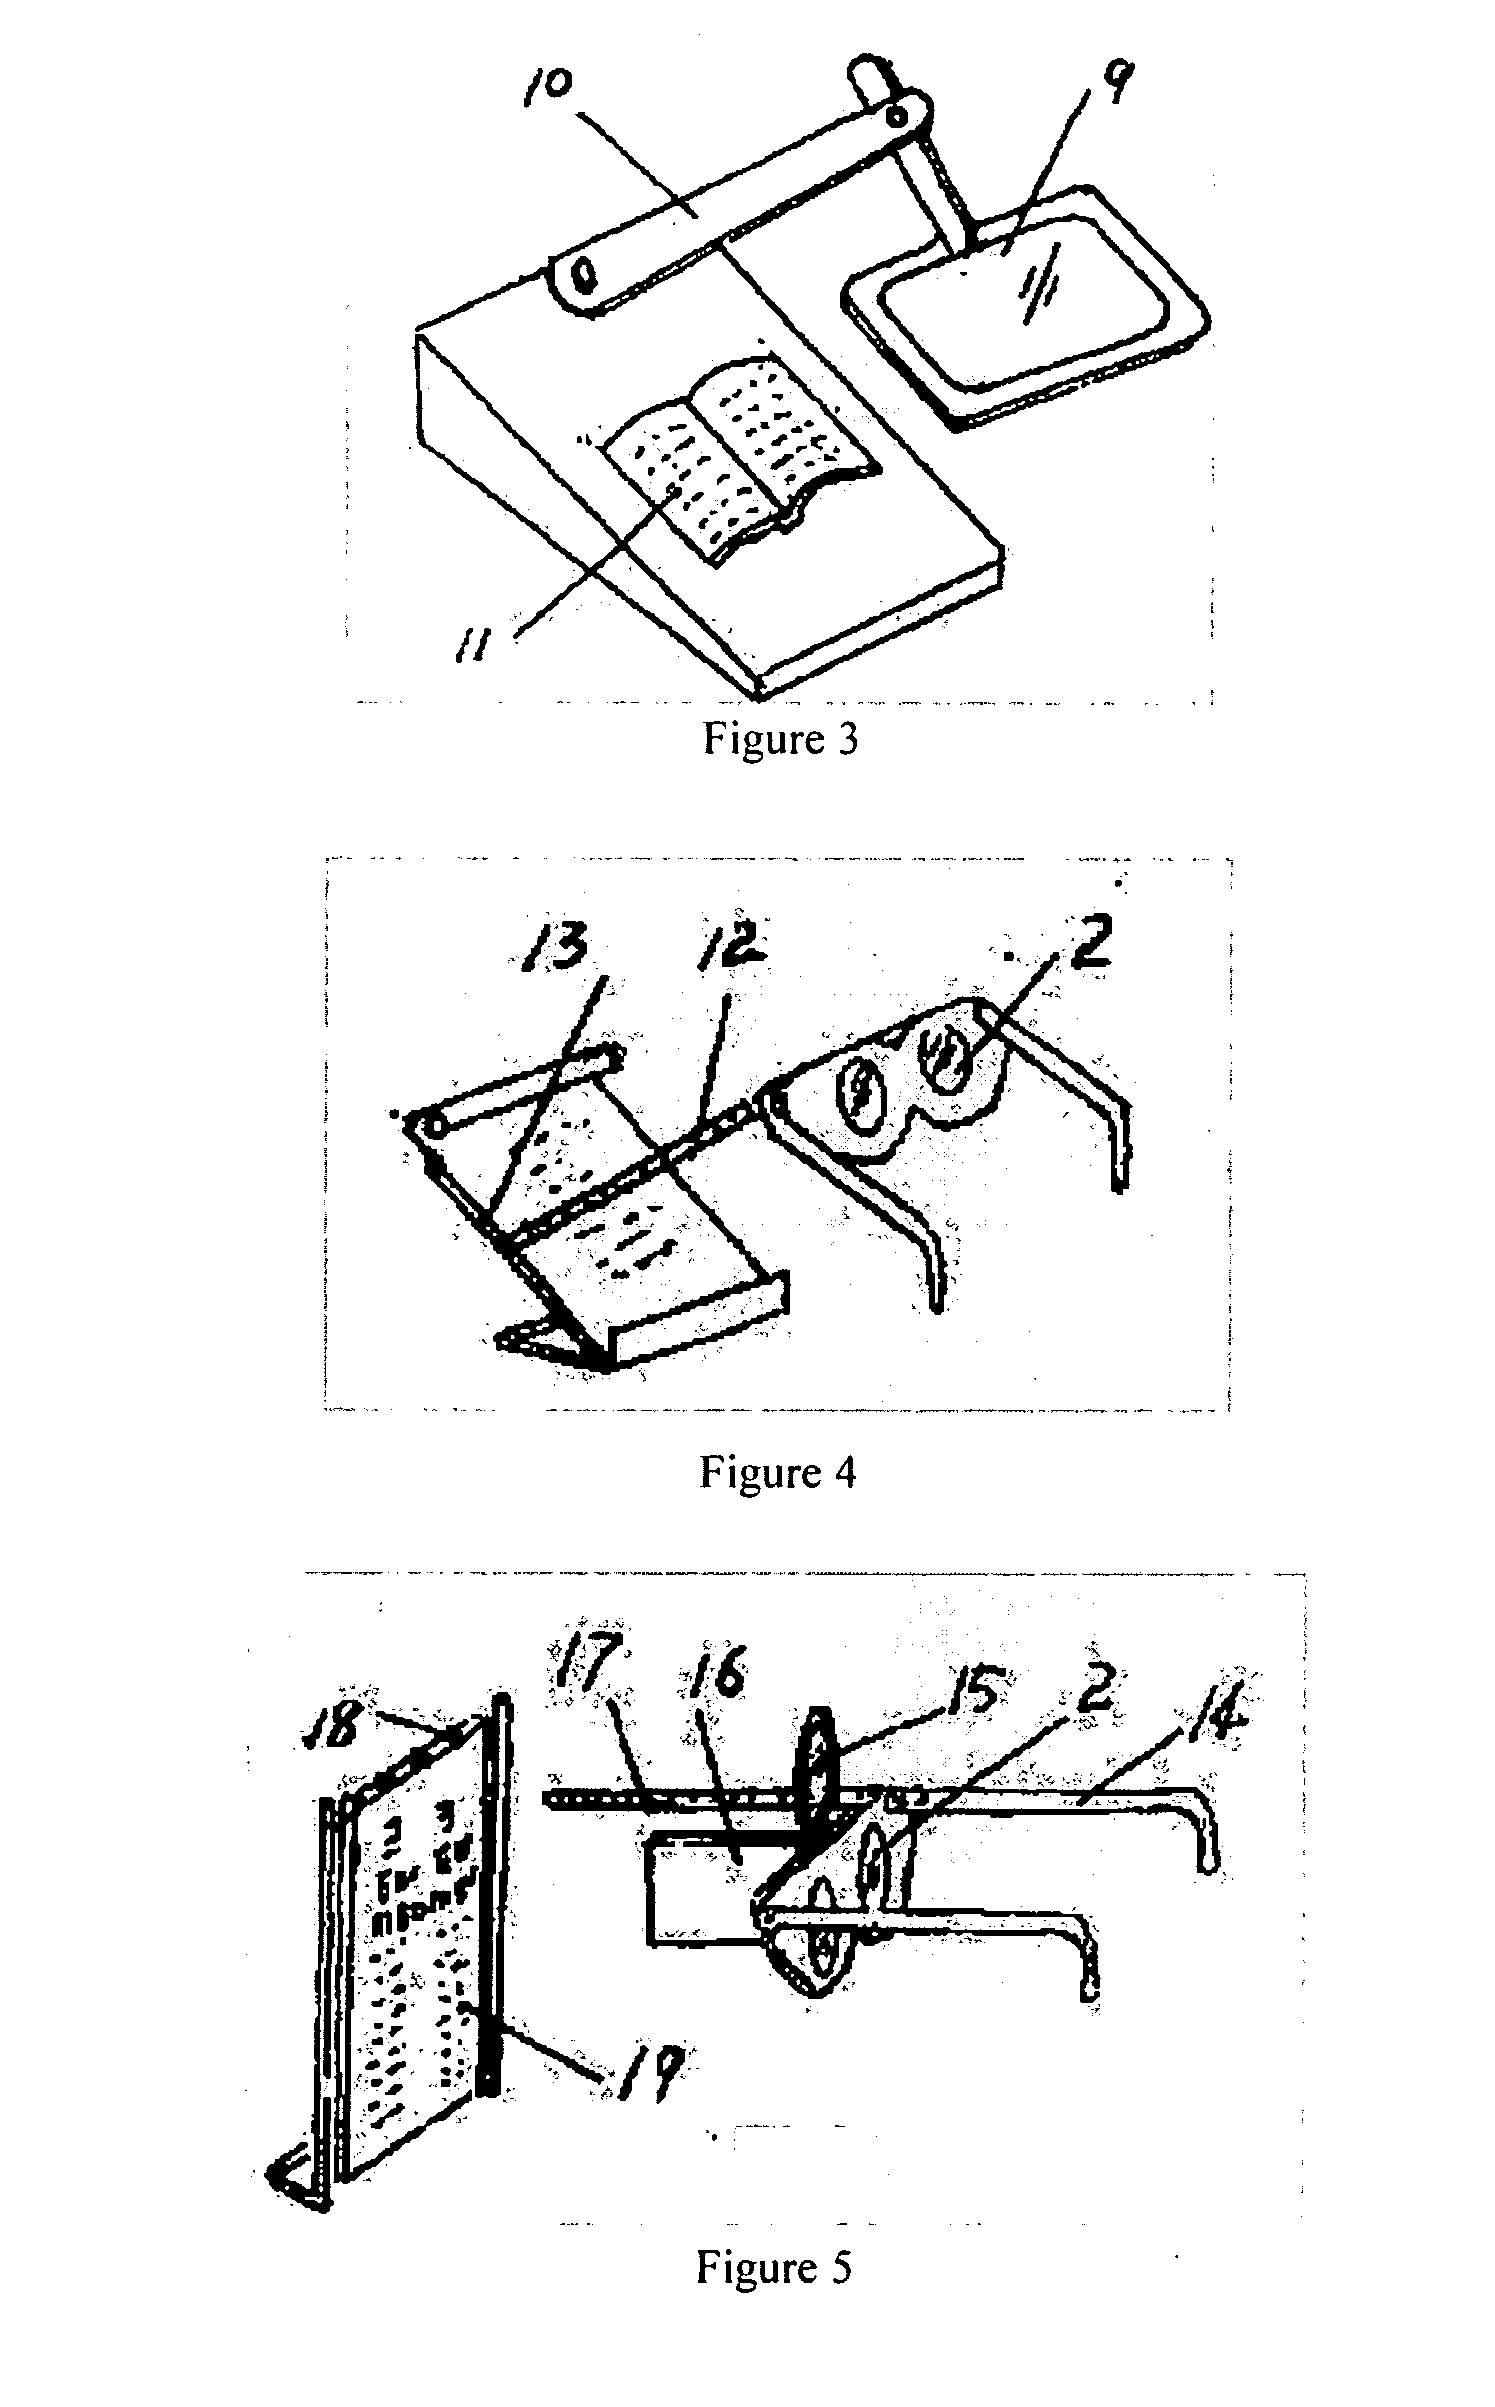 Device for Preventing and Treating Myopia